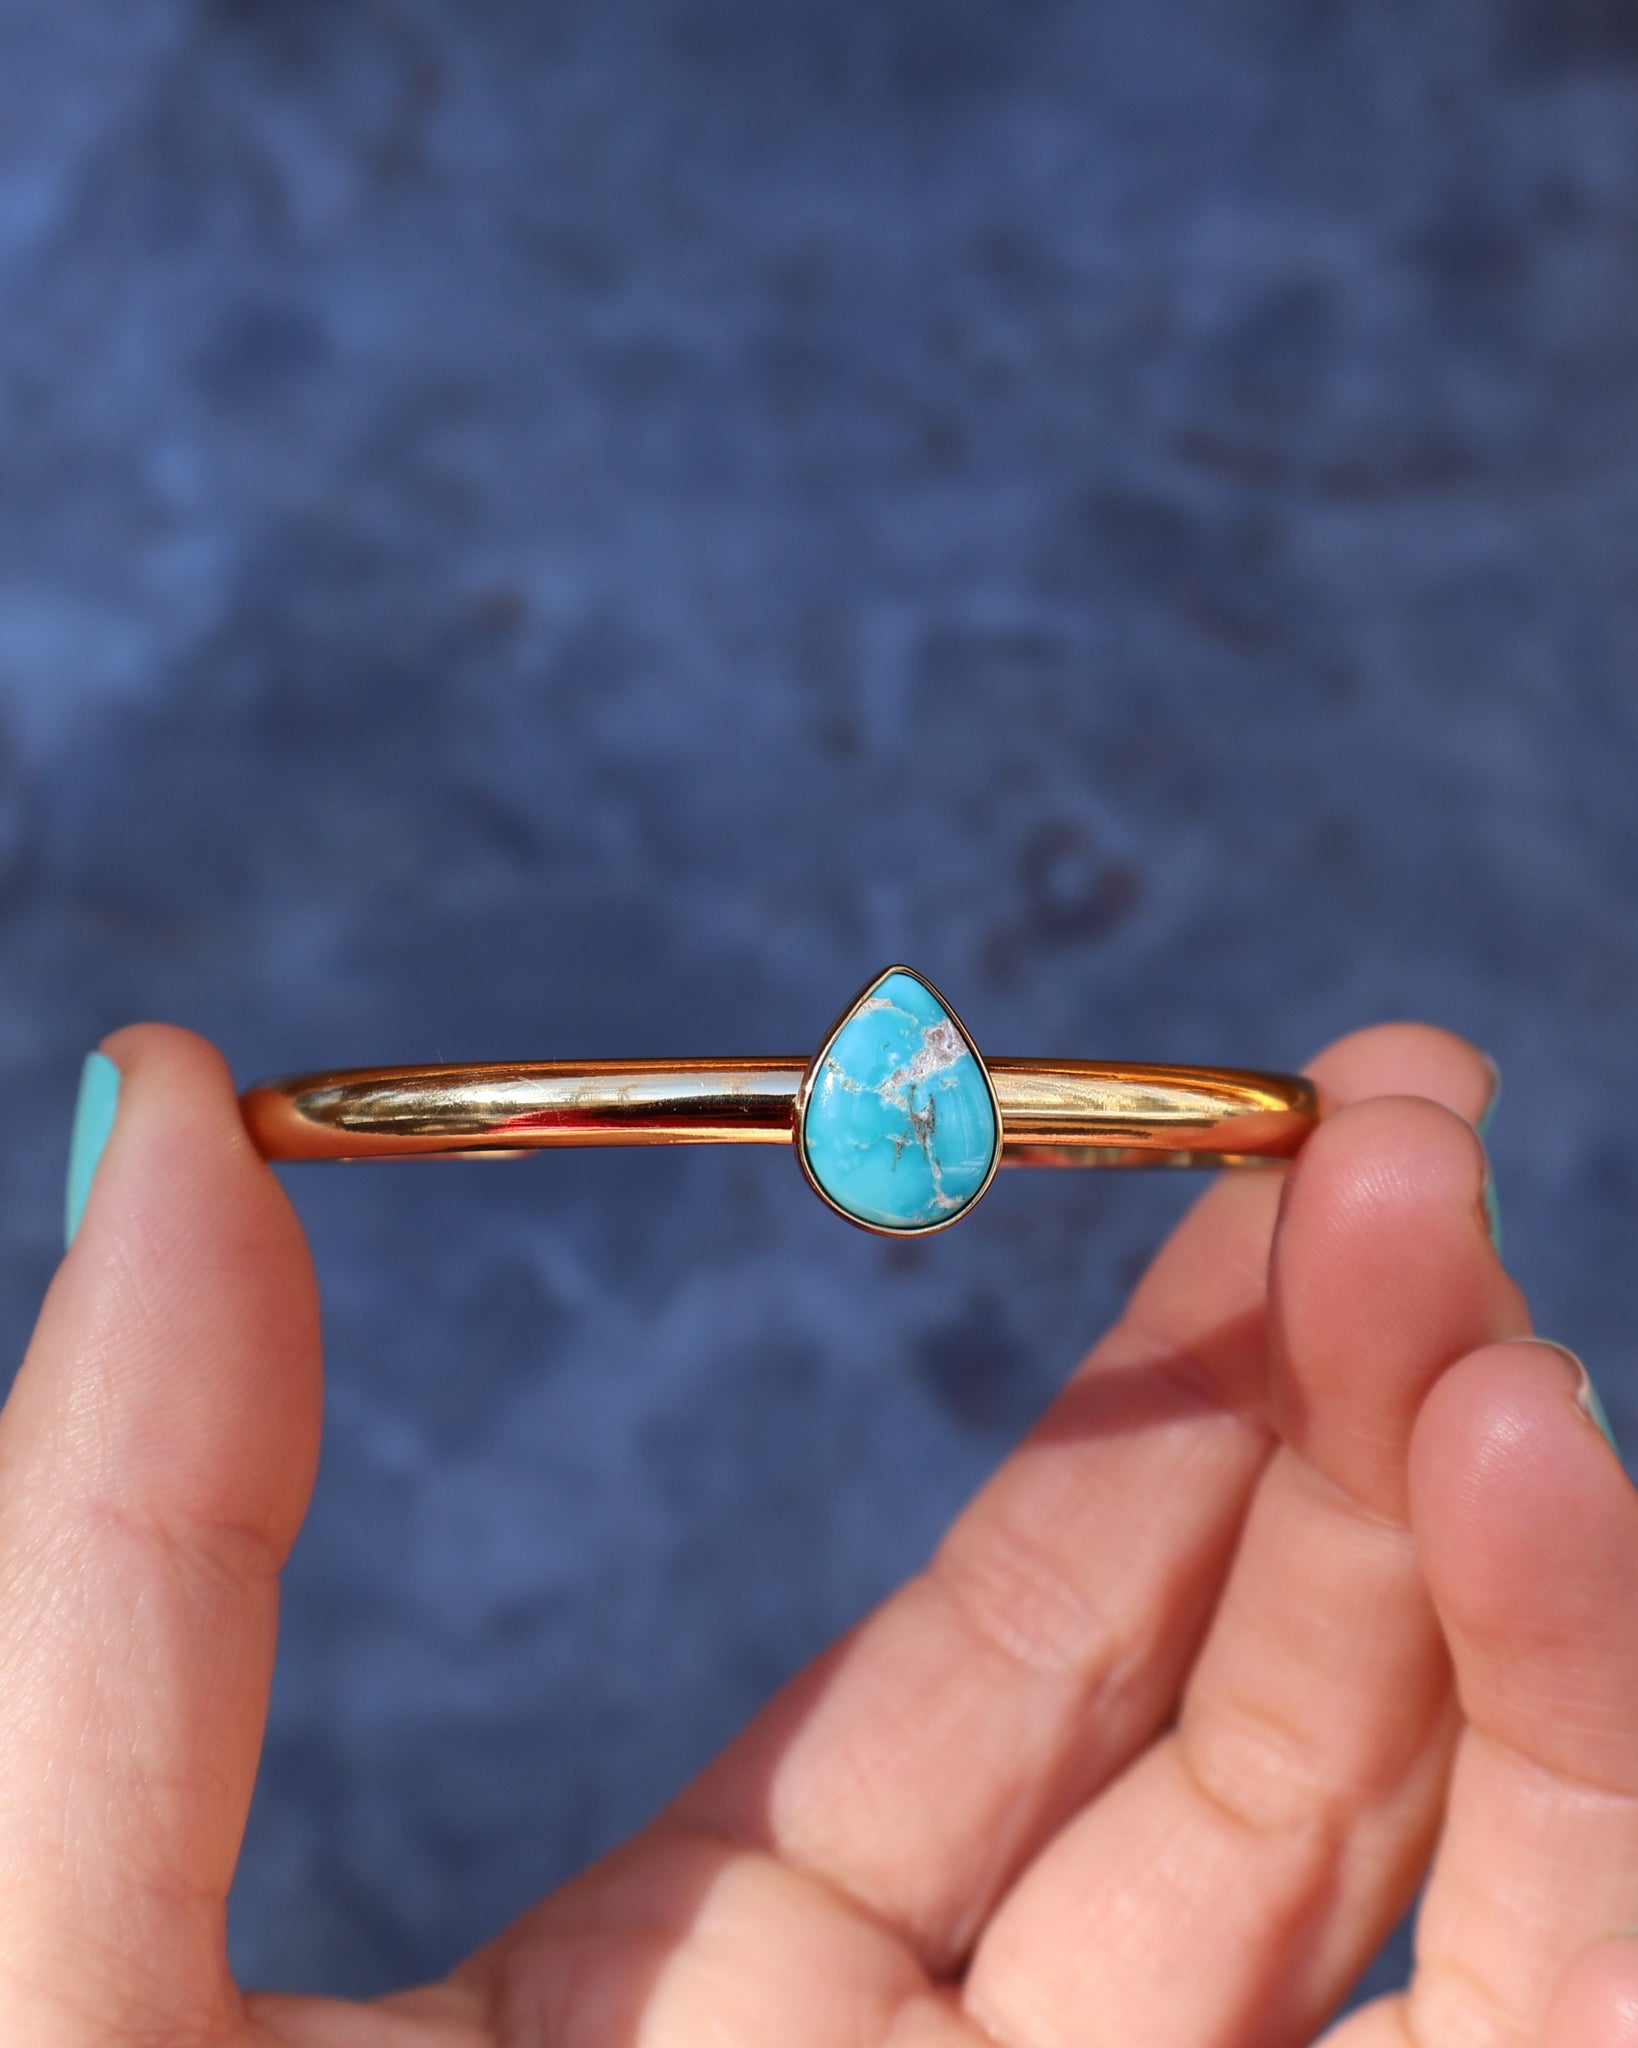 Winter Thaw Drip Cuff in Gold Alchemia & Turquoise Adjustable WT32